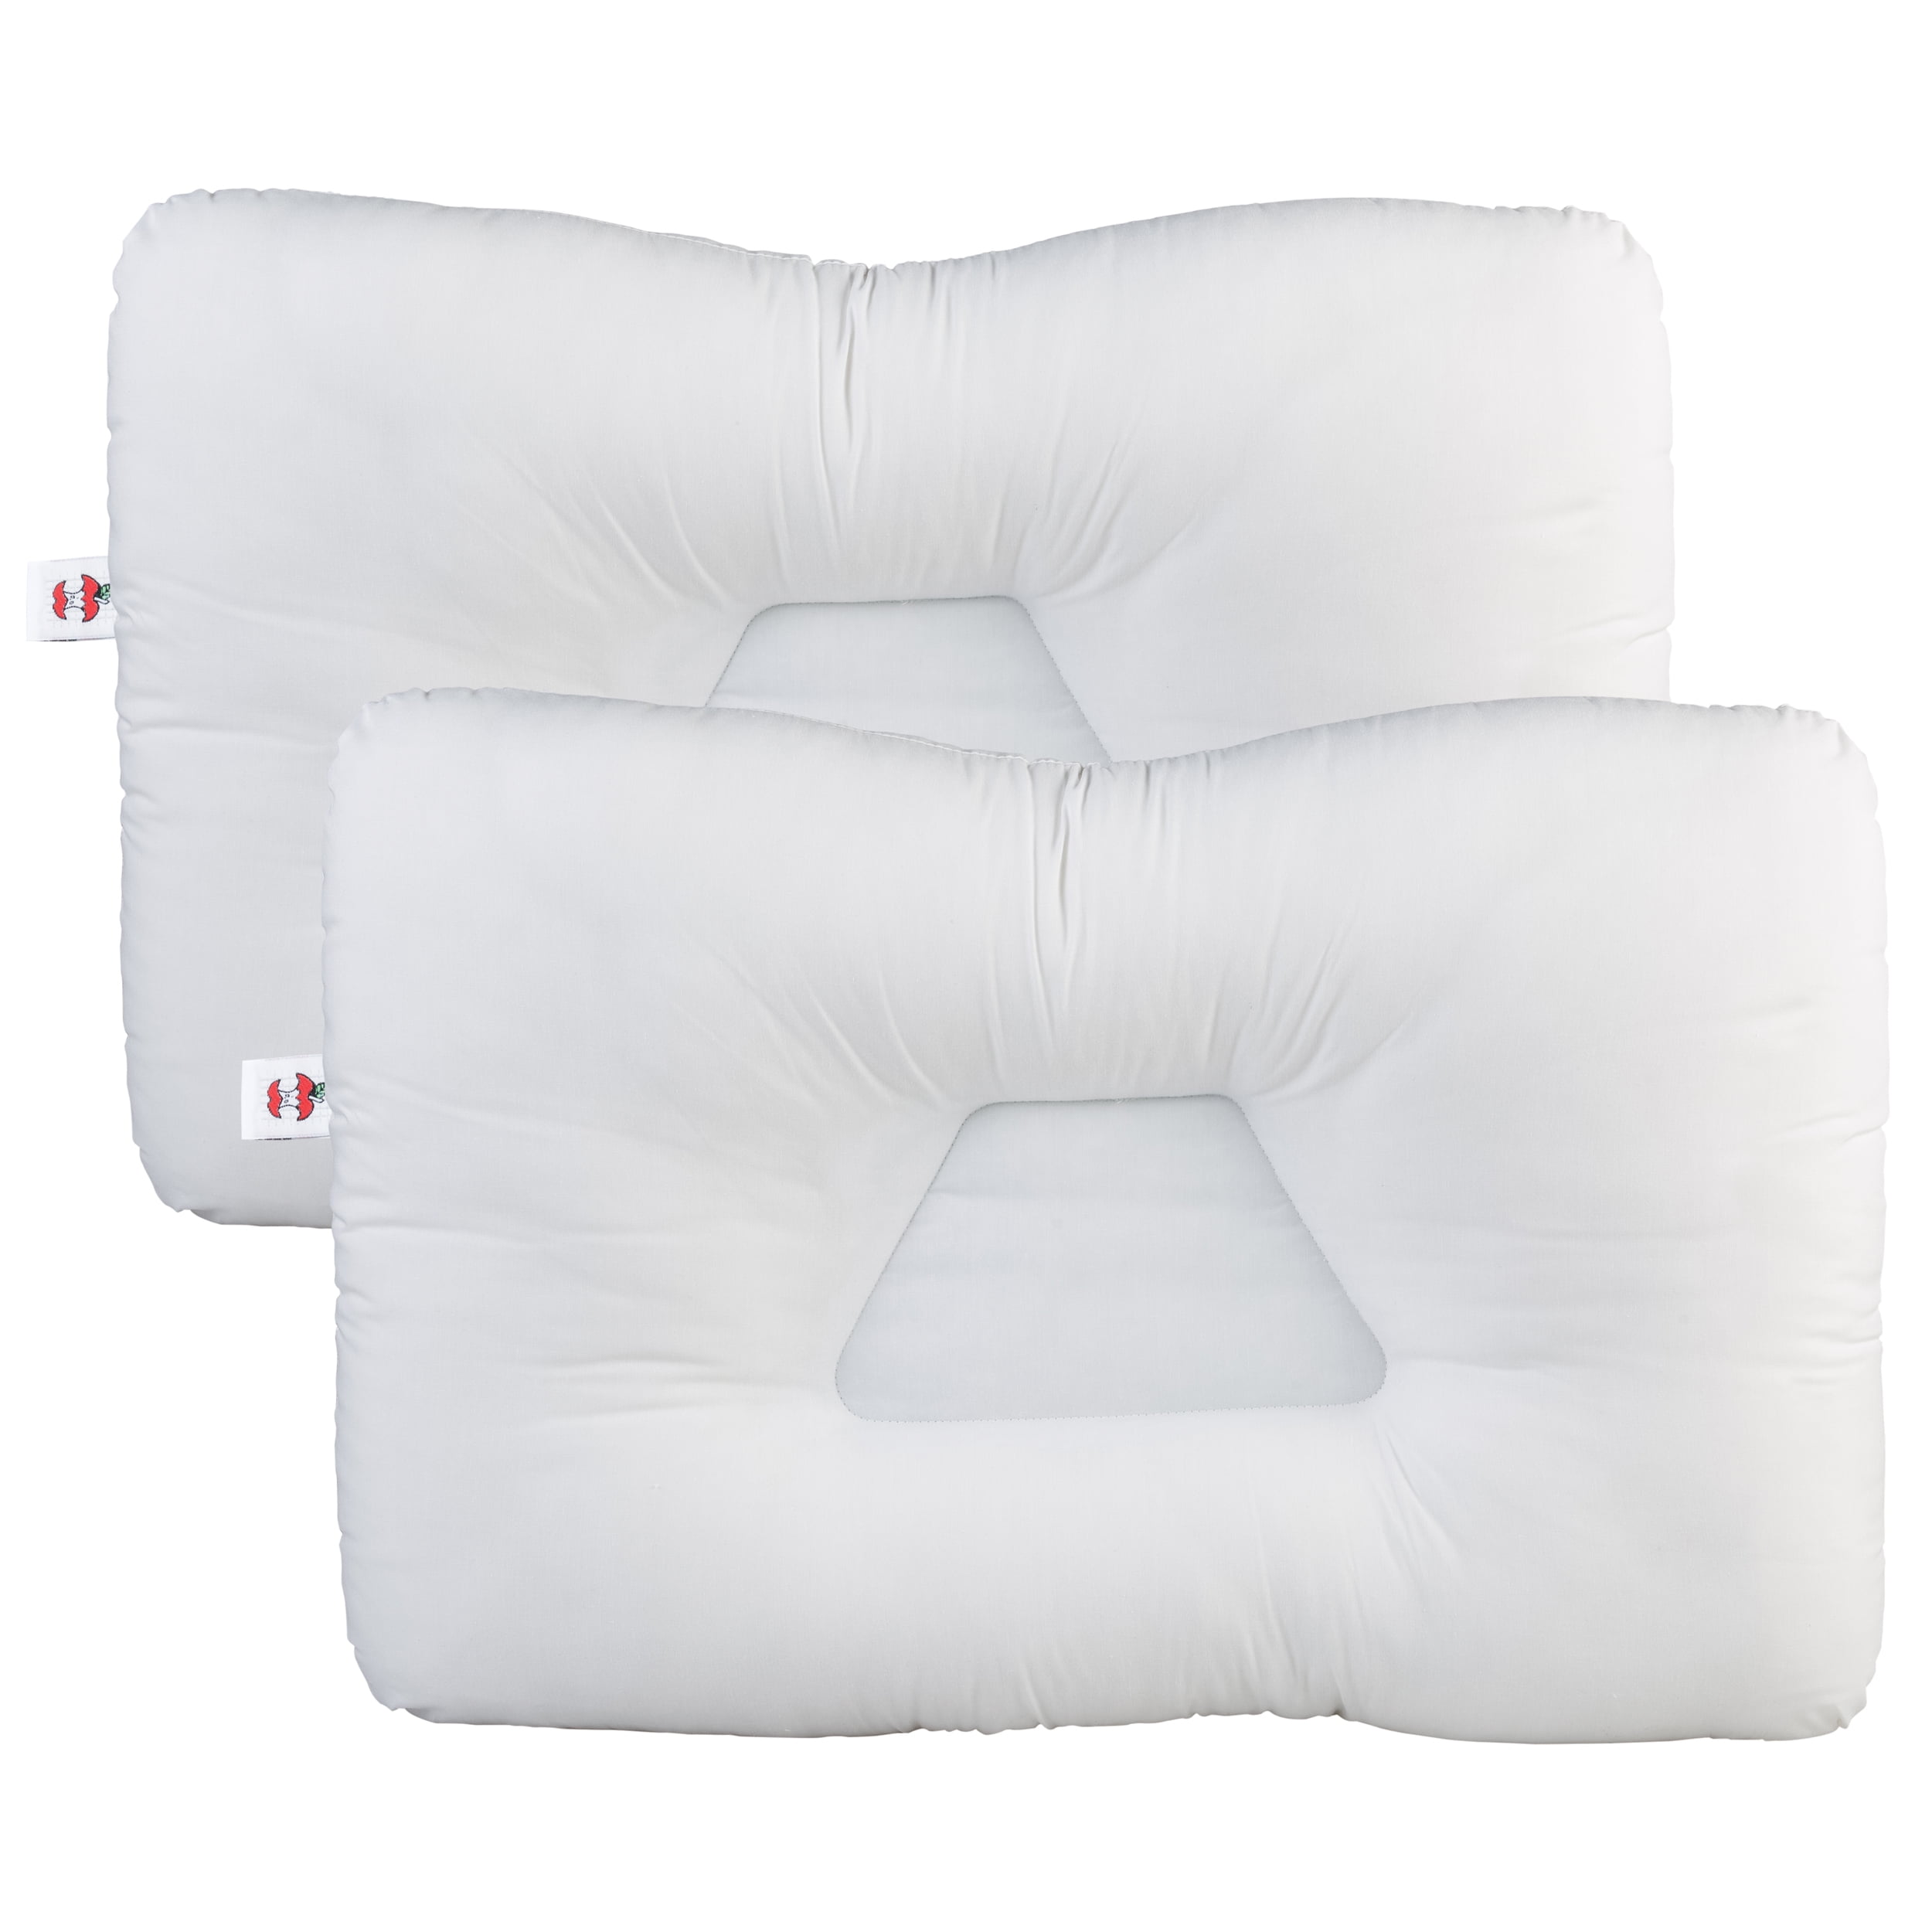 The Wedge, the pillow to support neck –